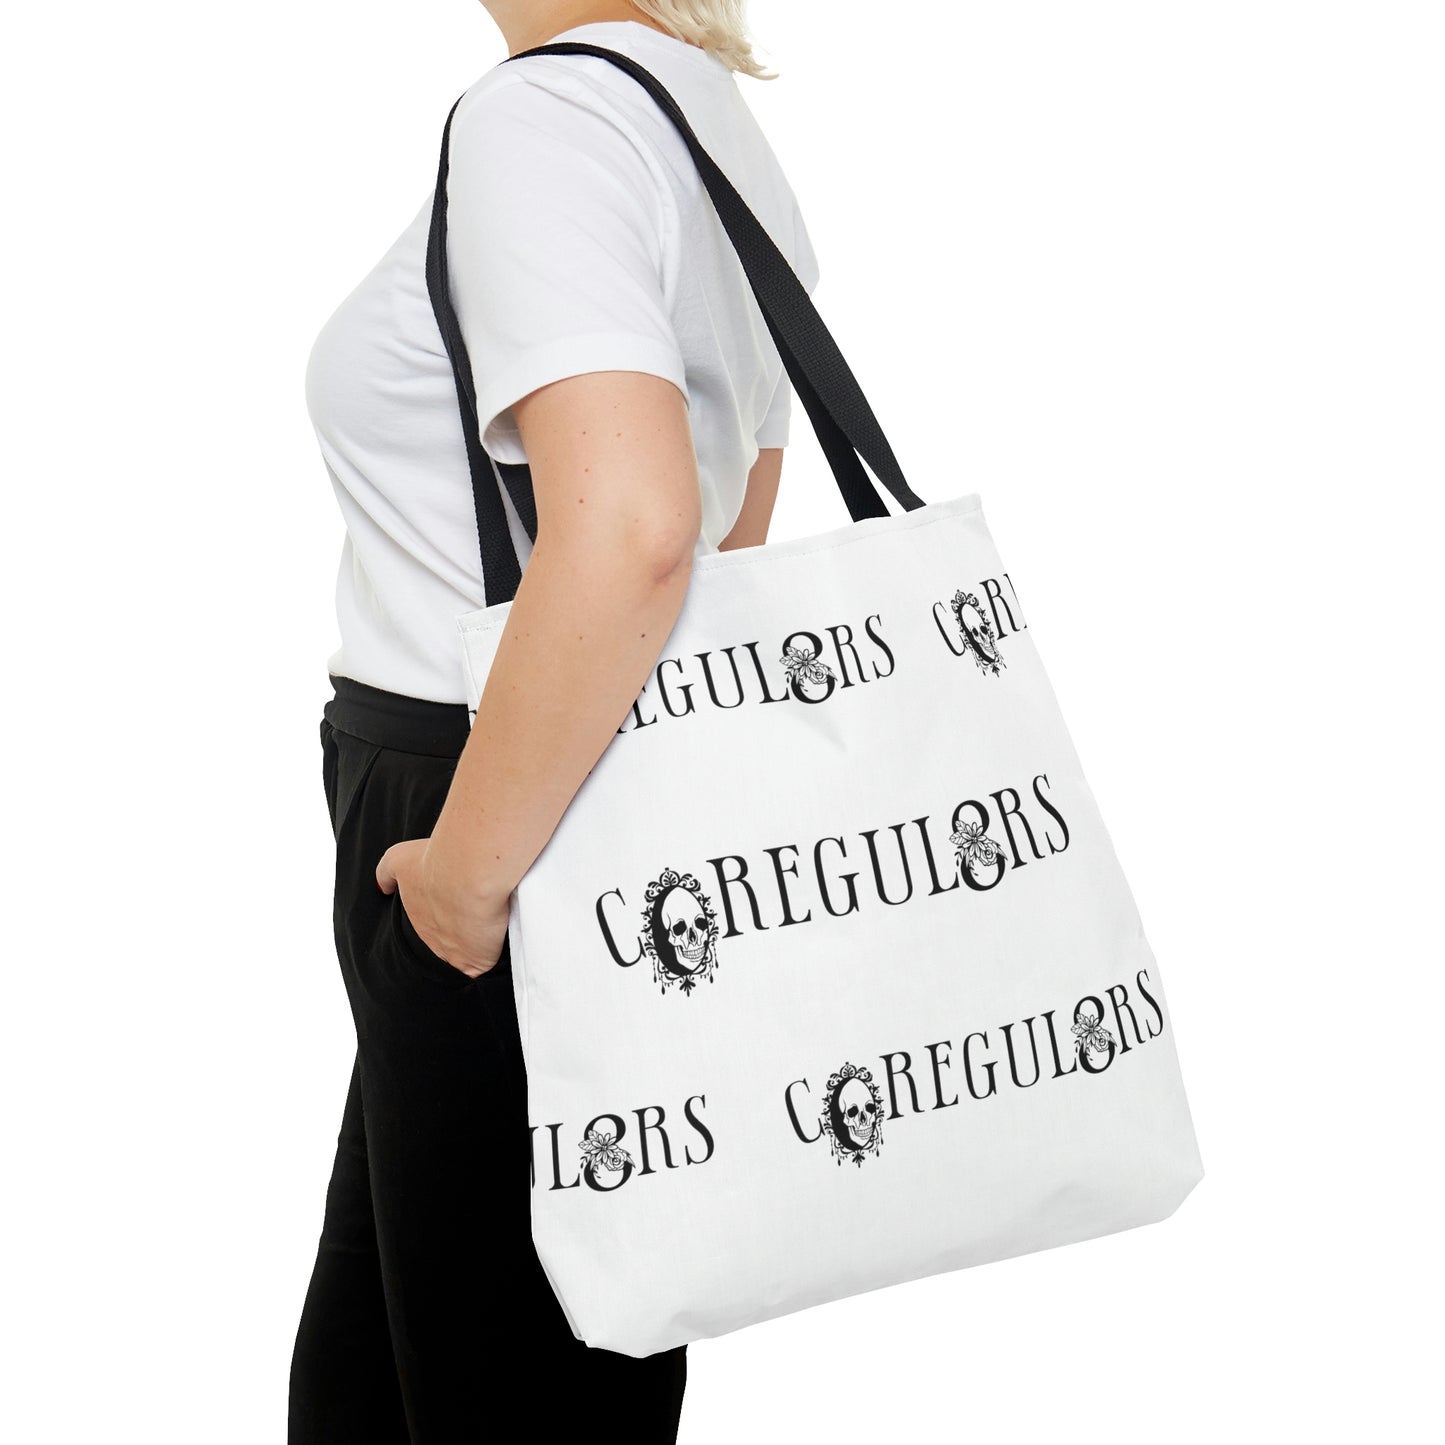 Official Co-Regulators Merch [Gauthism Line] Tote Bag in 3 sizes